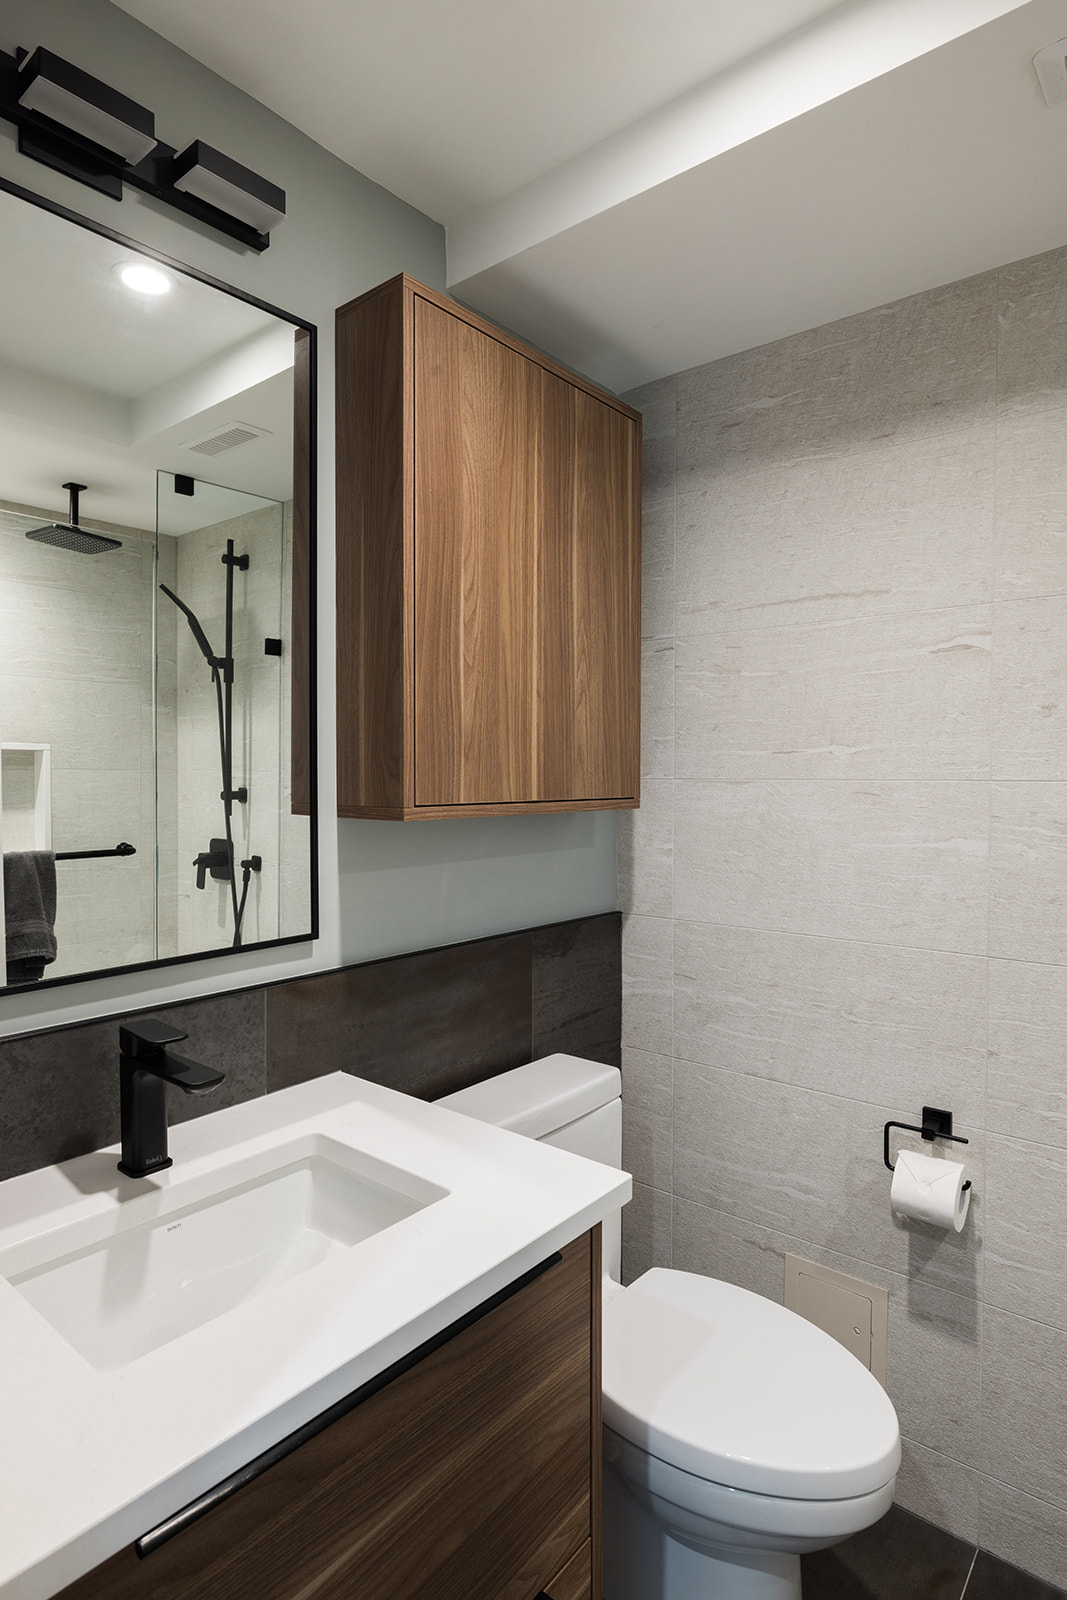 Downtown Toronto condo bathroom renovation with built-in storage above toilet